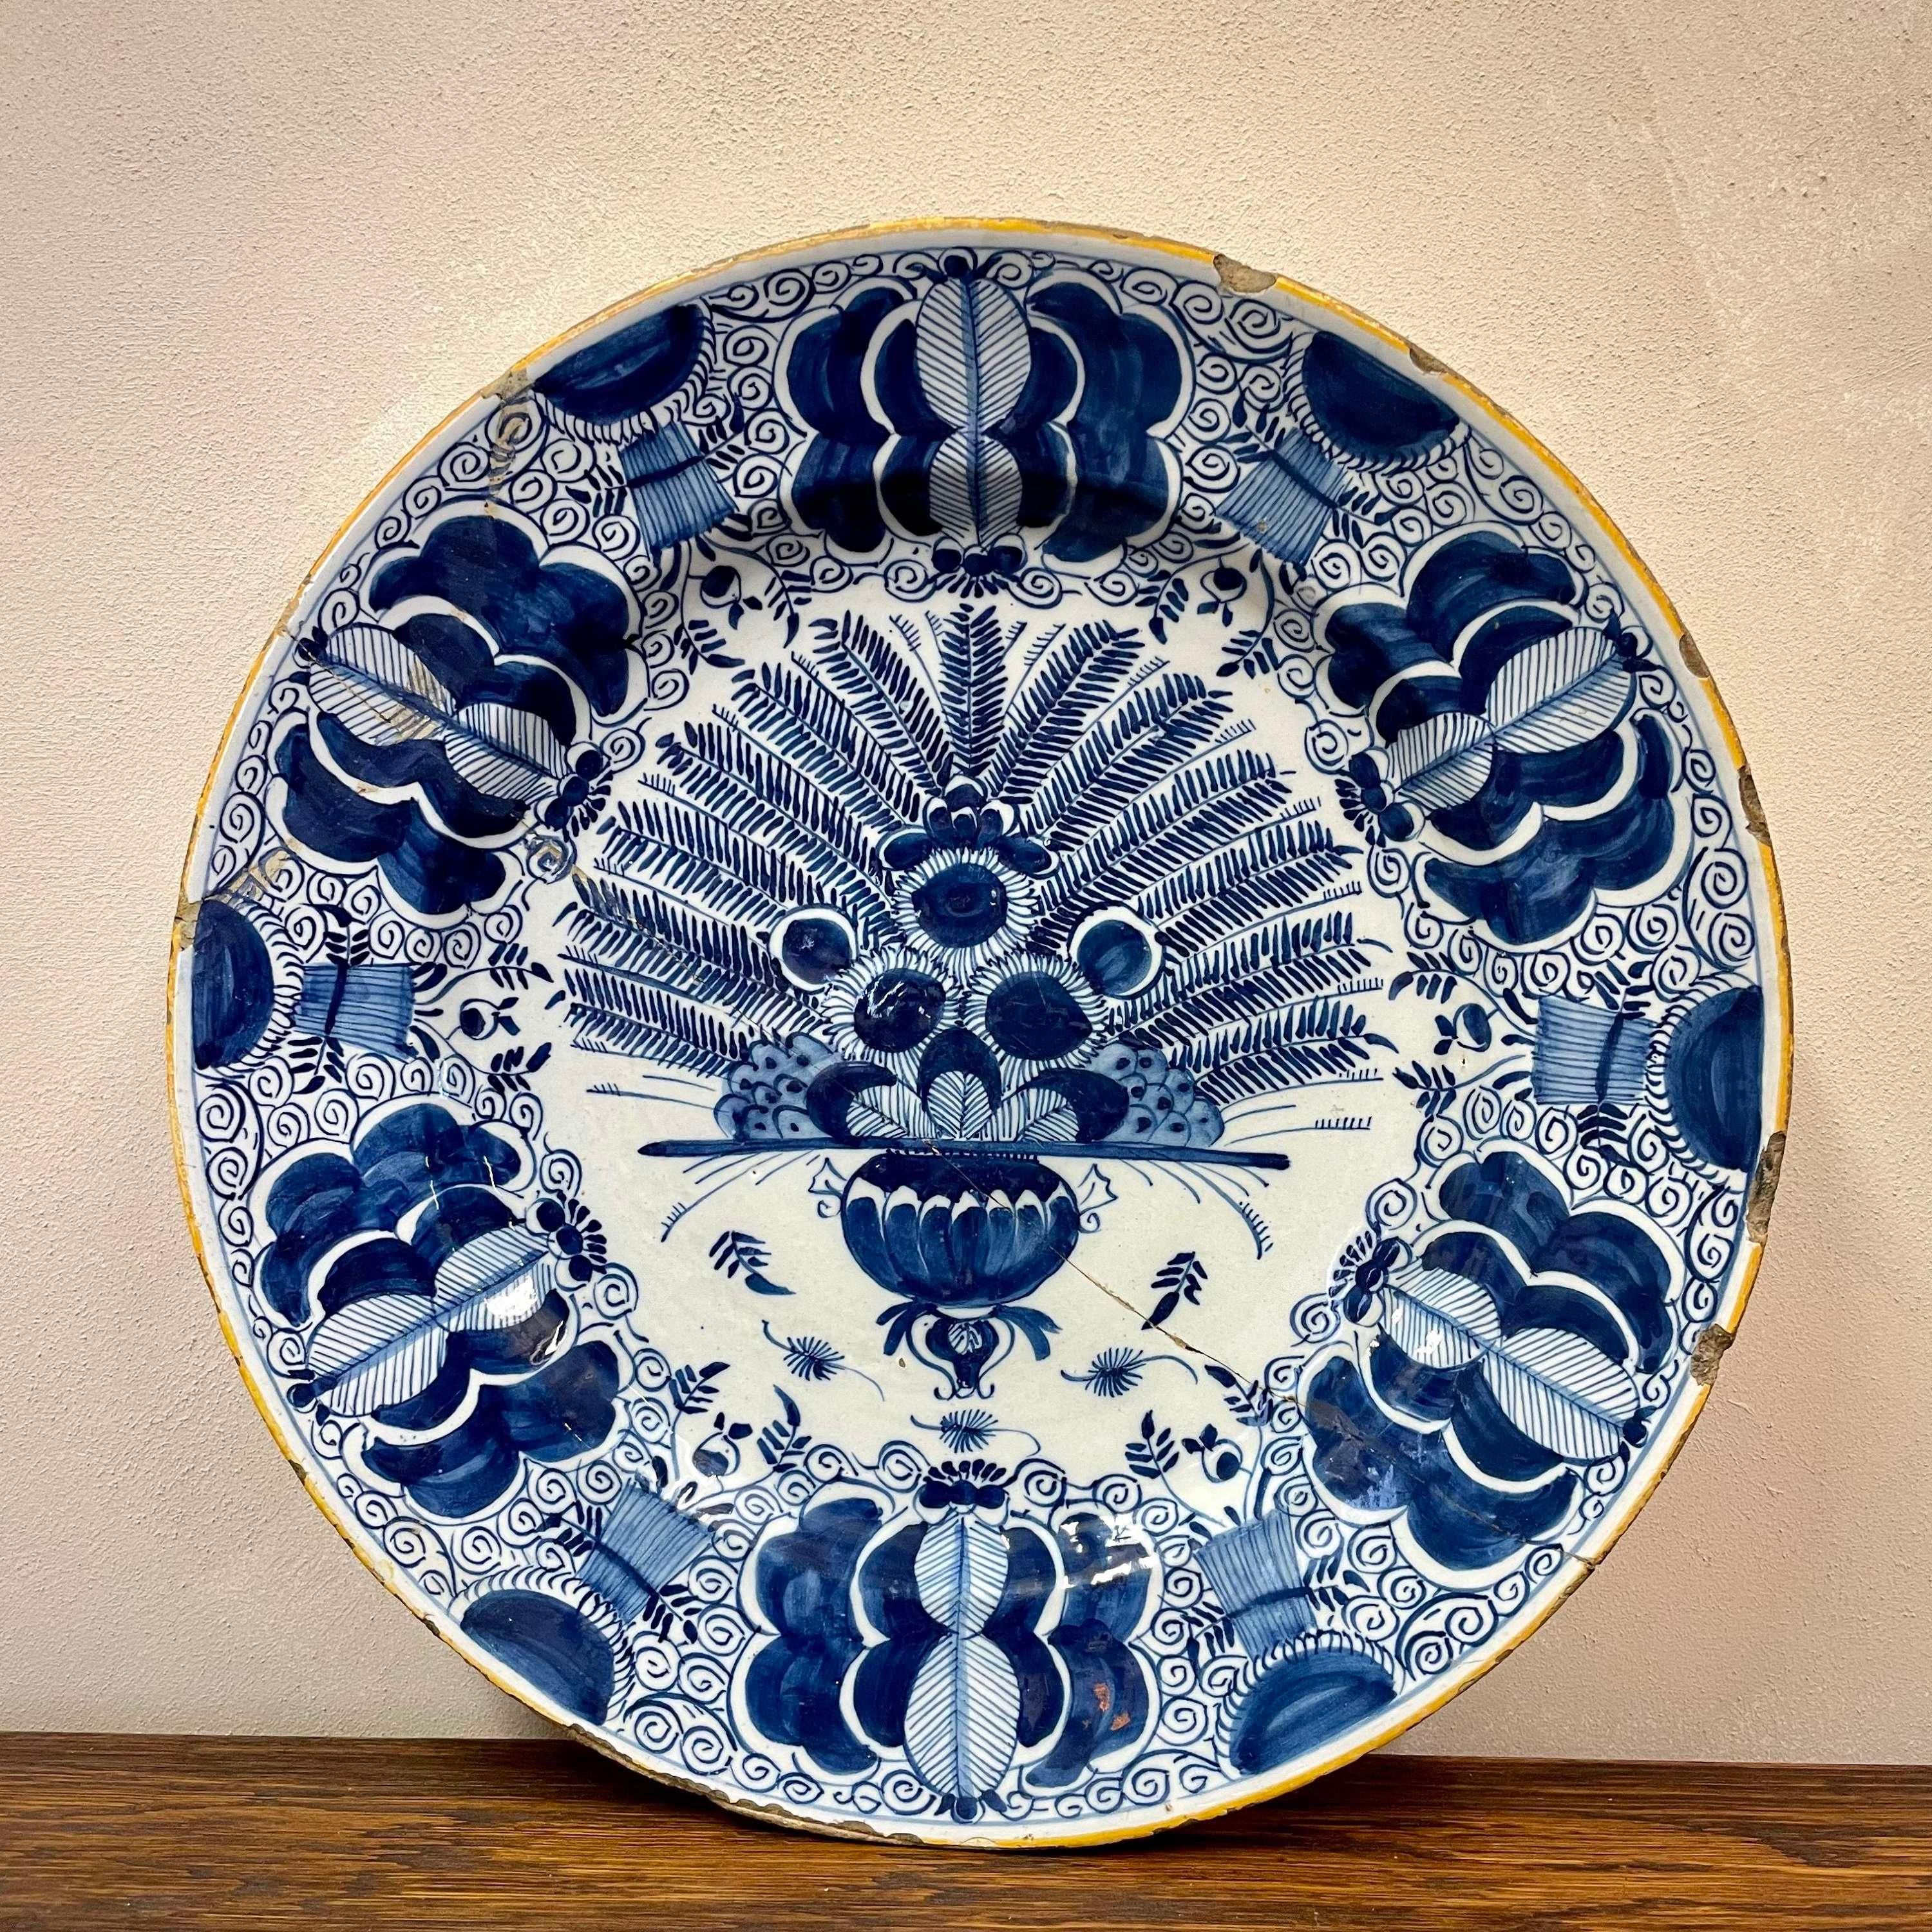 Dutch Delft Peacock charger.
circa 1750. 
Peacock feathers are displayed in a bulbous urn. 
The edge of the plate is glazed in ochre. 
Old repair. 35cm / 13.8'

More Delft on our profile 
To have a blue and white collection in one location